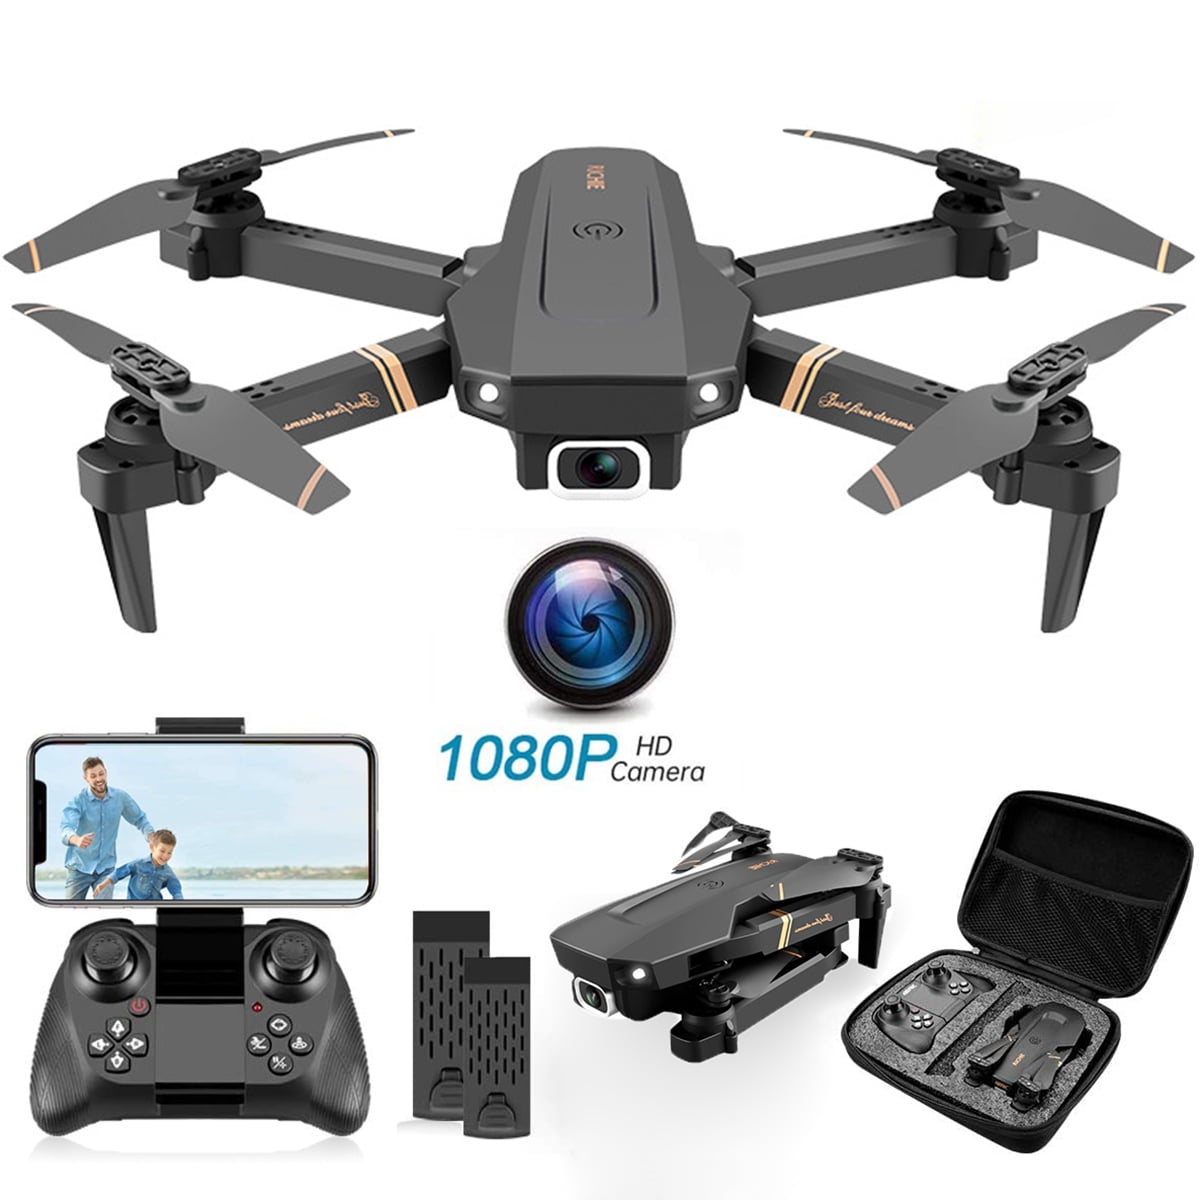 PIPIN Foldable Mini Suitcase Drone for Kids with HD Camera 